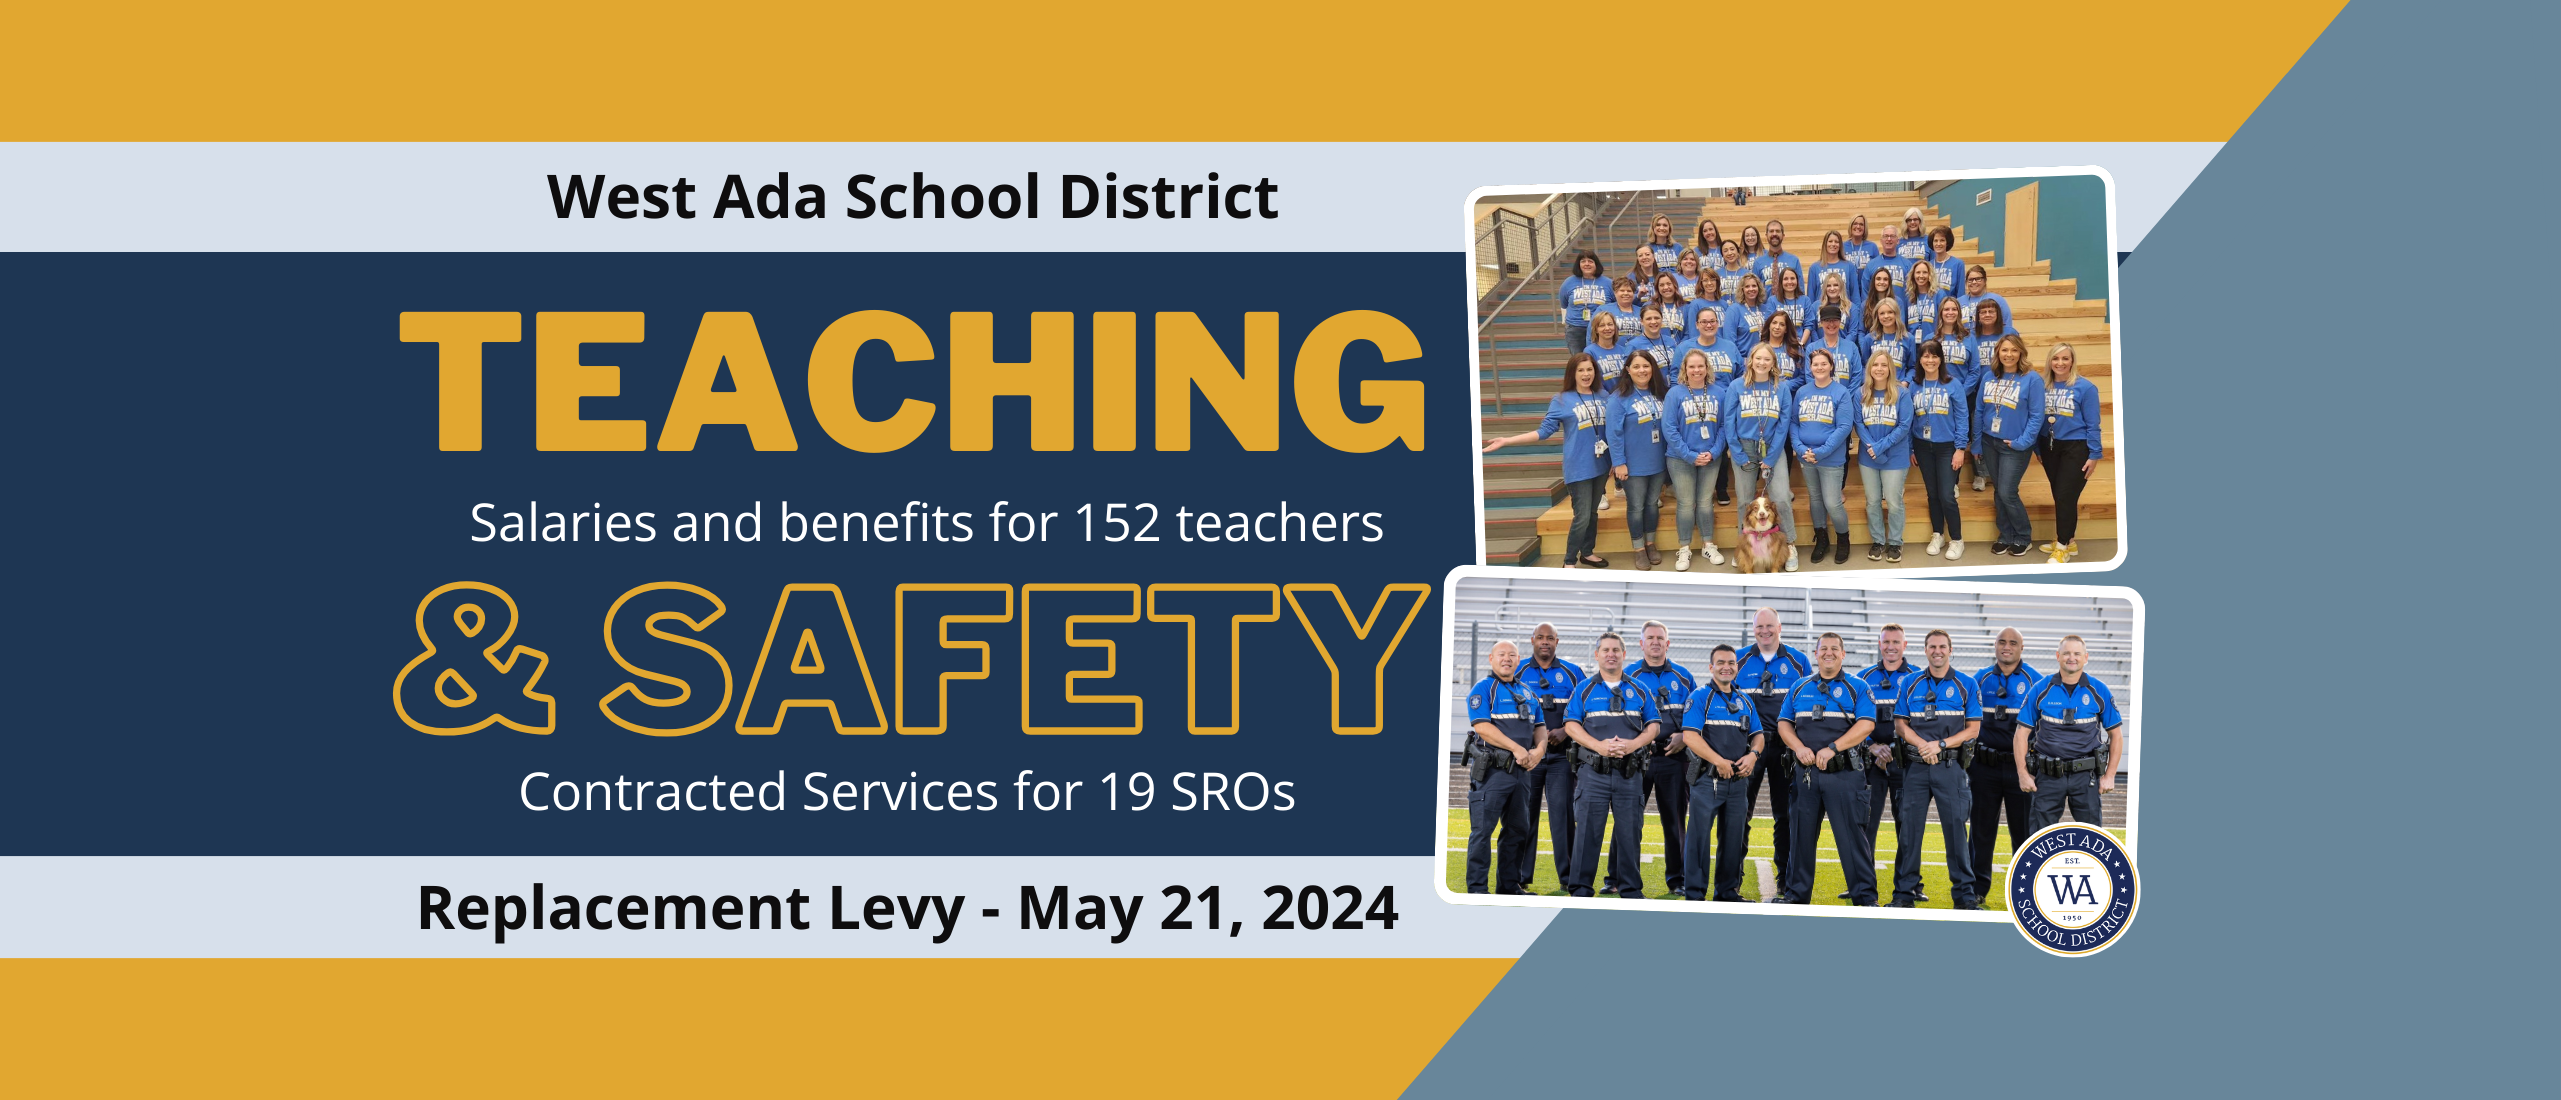 Replacement Levy 2024 Website Gallery image. Includes two photos: one of West Ada teachers, and one of West Ada SROs. Text on image reads: West Ada Replacement Levy - May 21, 2024 - Teaching & Safety - Salaries and benefits for 152 teachers - Contracted services for 19 SROs